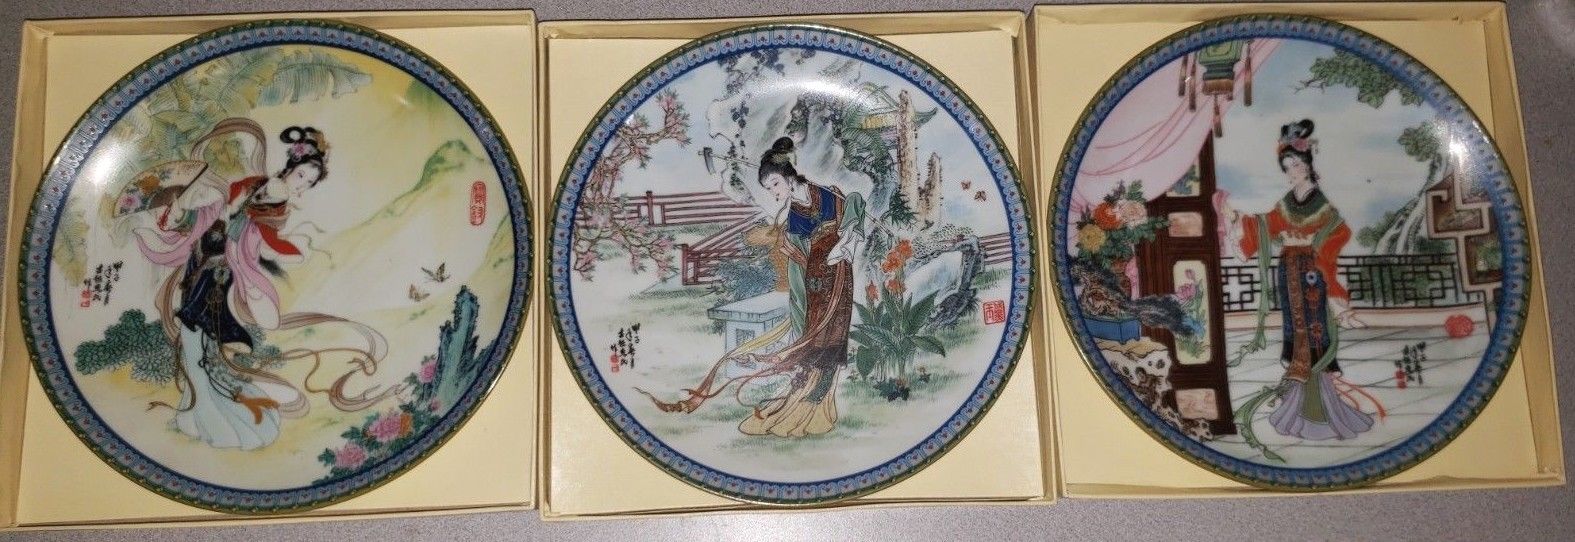 BEAUTIES OF THE RED MANSION IMPERIAL JINGDEZHEN PLATES ZHAO HUIMIN LOT OF 3